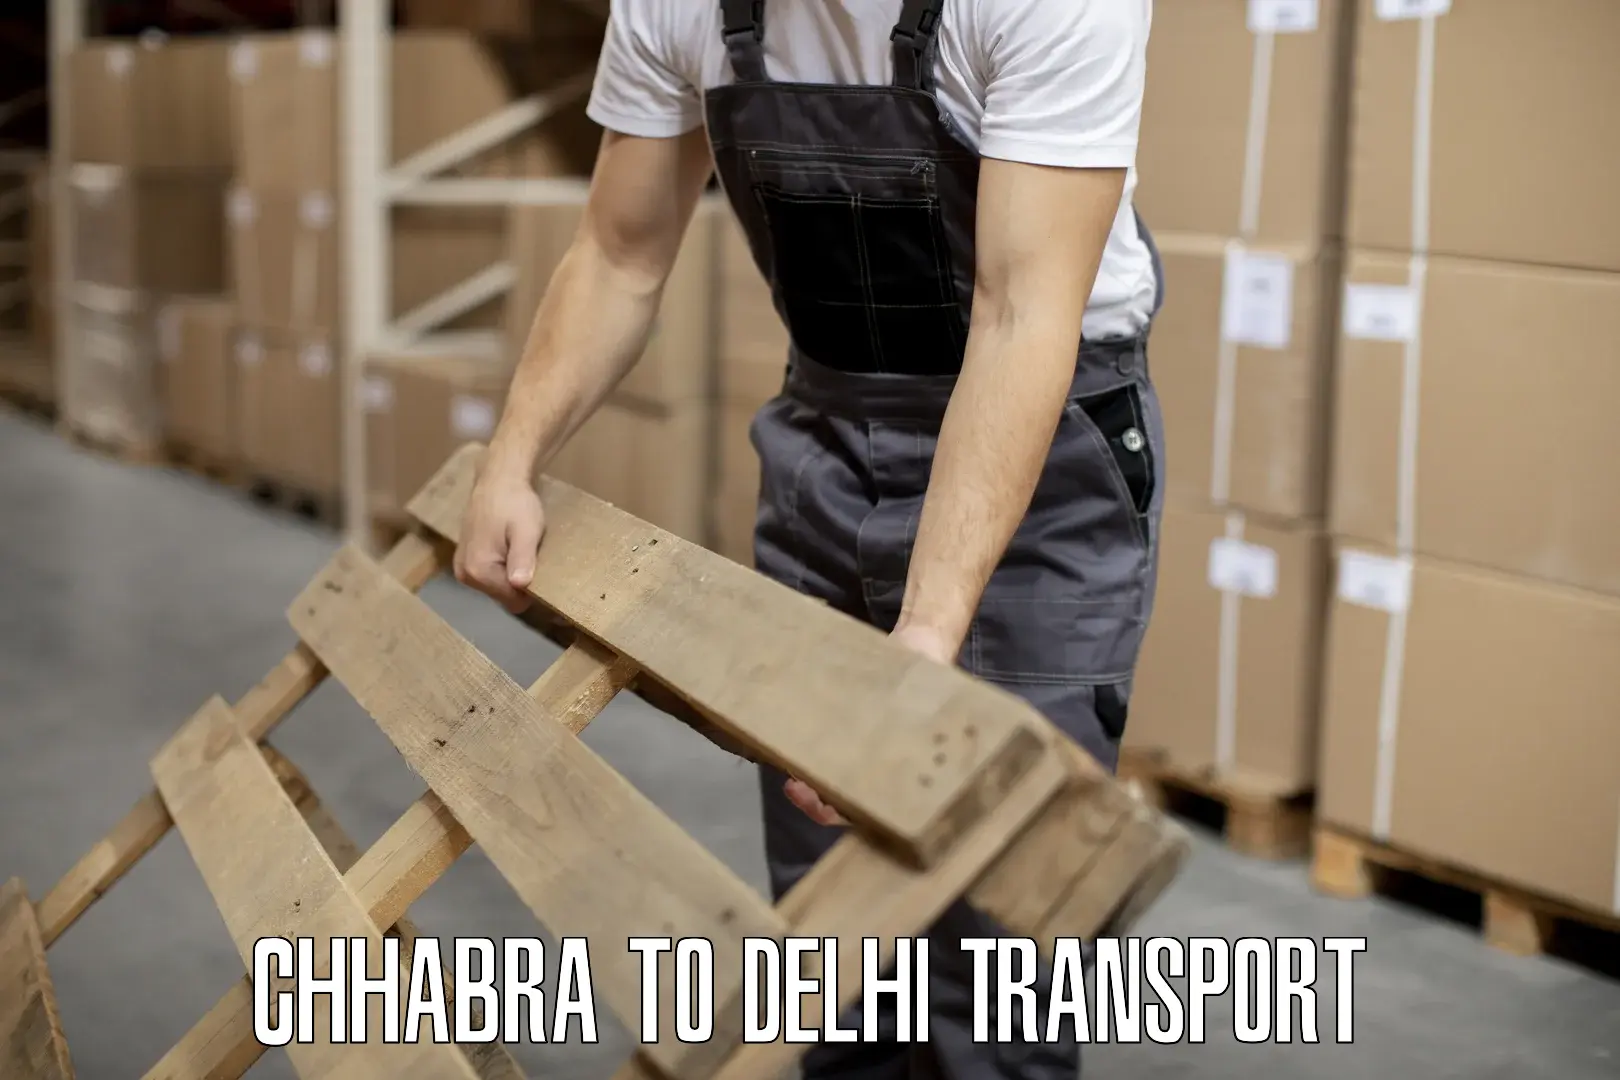 Part load transport service in India Chhabra to NCR